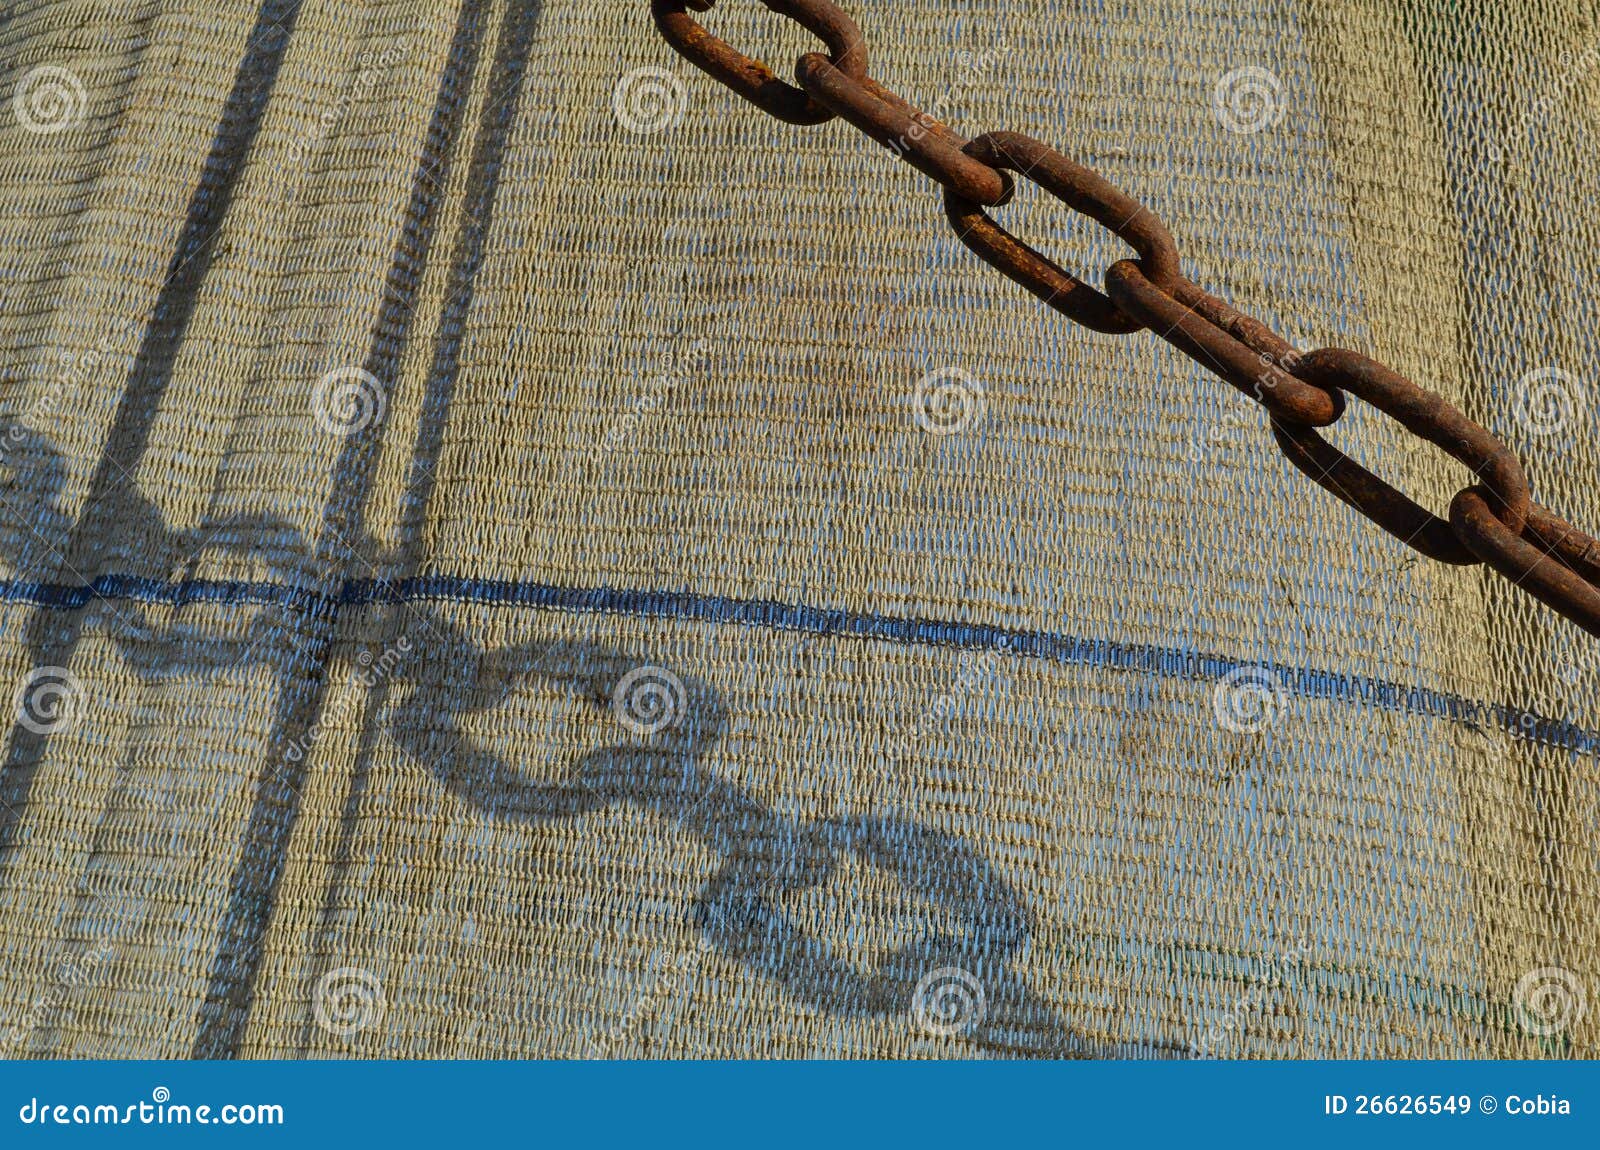 Fishing gear of a danish shrimp boat. Shadow of a rusty chain on ...